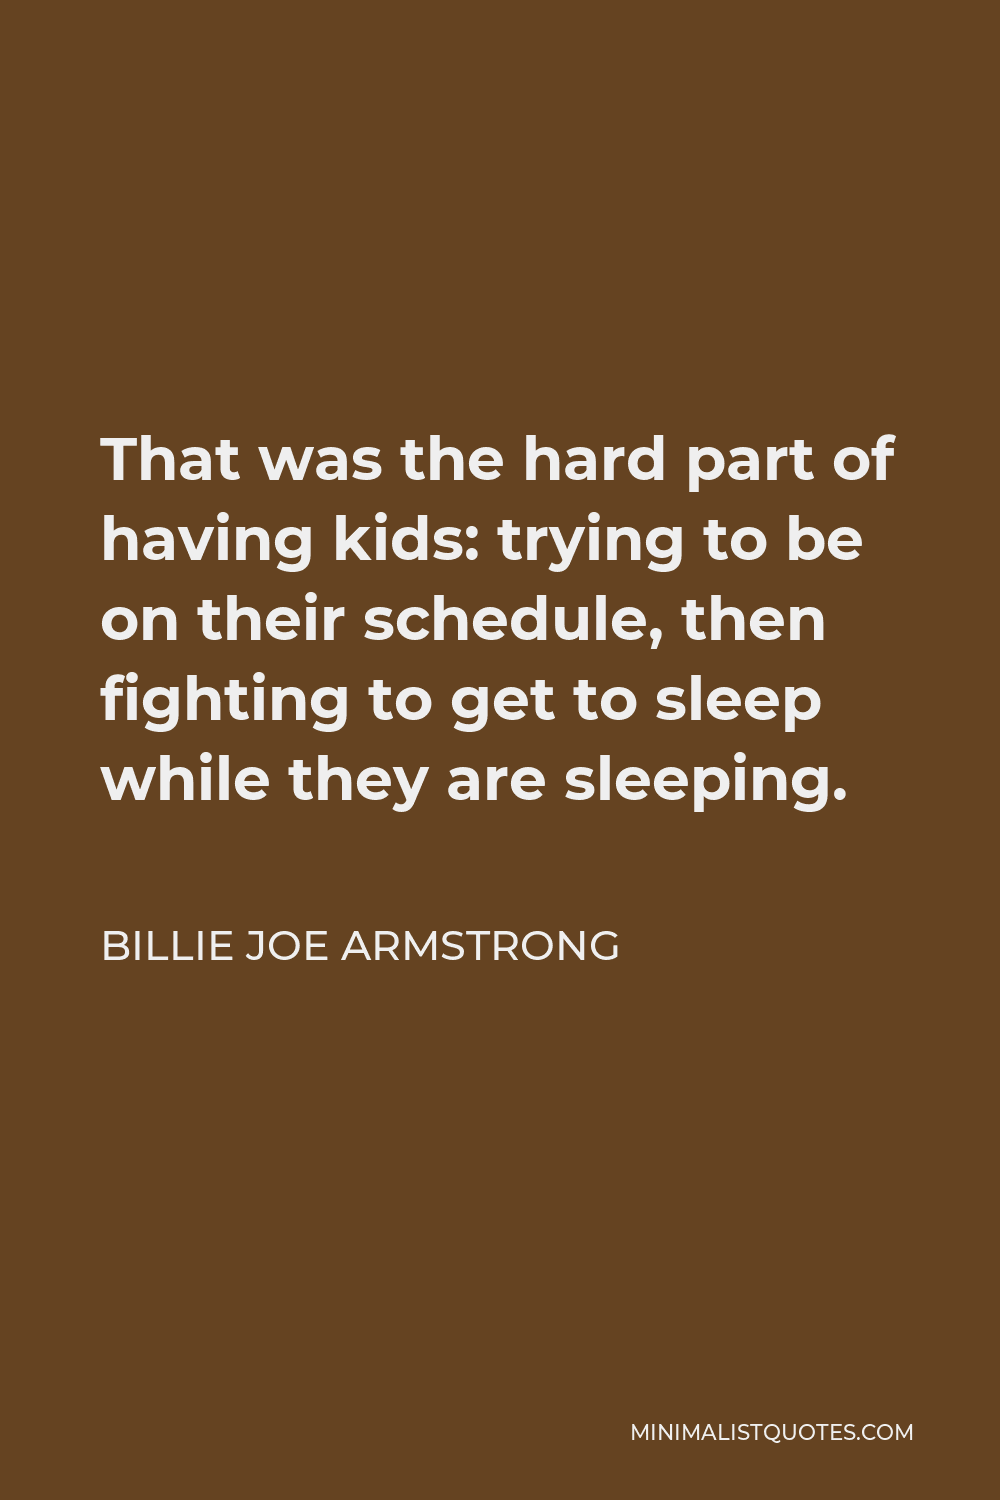 Billie Joe Armstrong Quote - That was the hard part of having kids: trying to be on their schedule, then fighting to get to sleep while they are sleeping.